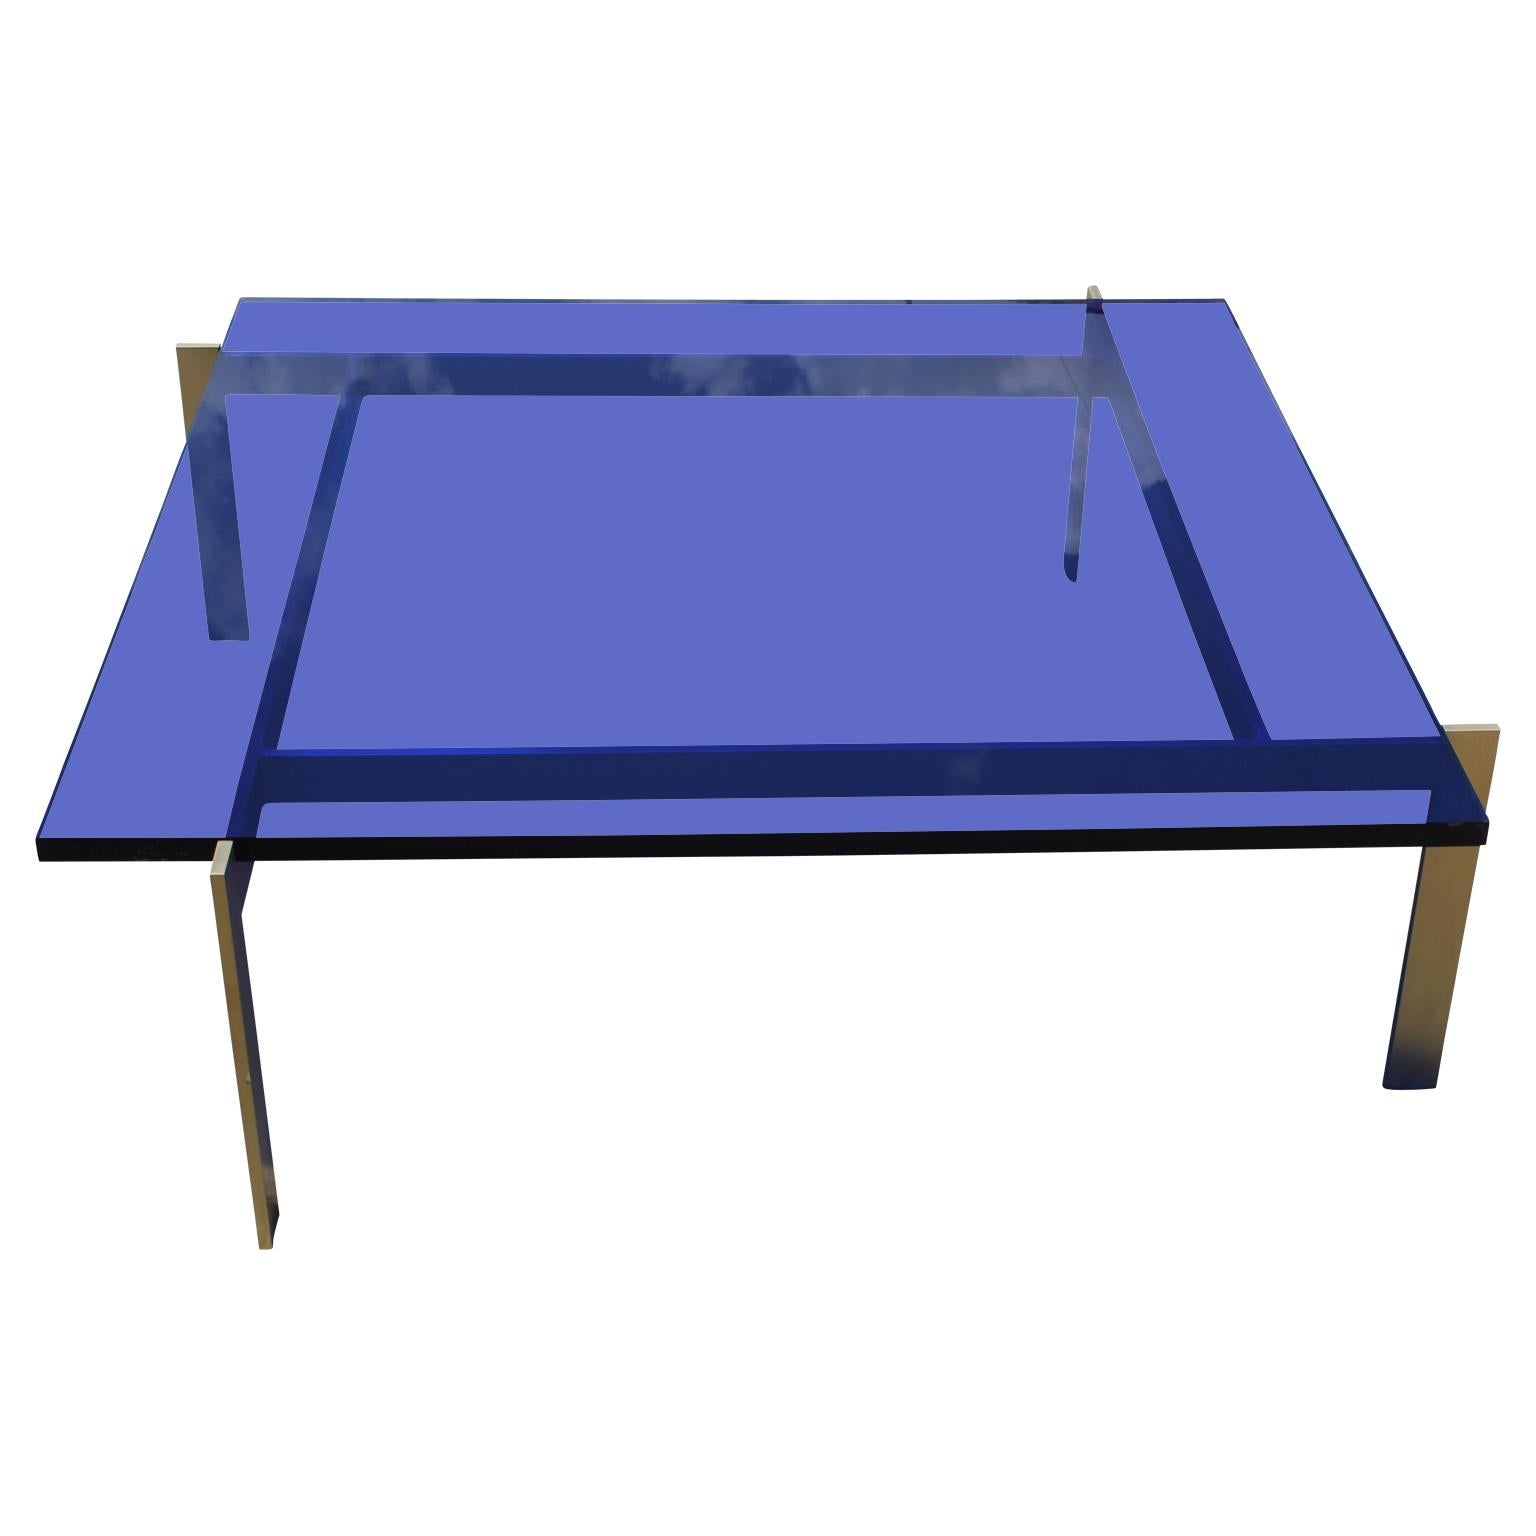 Modern custom-made coffee table featuring a 1 in. thick square blue Lucite or acrylic top with a 2 in. thick solid brass base. Multiple available, including a pink one.